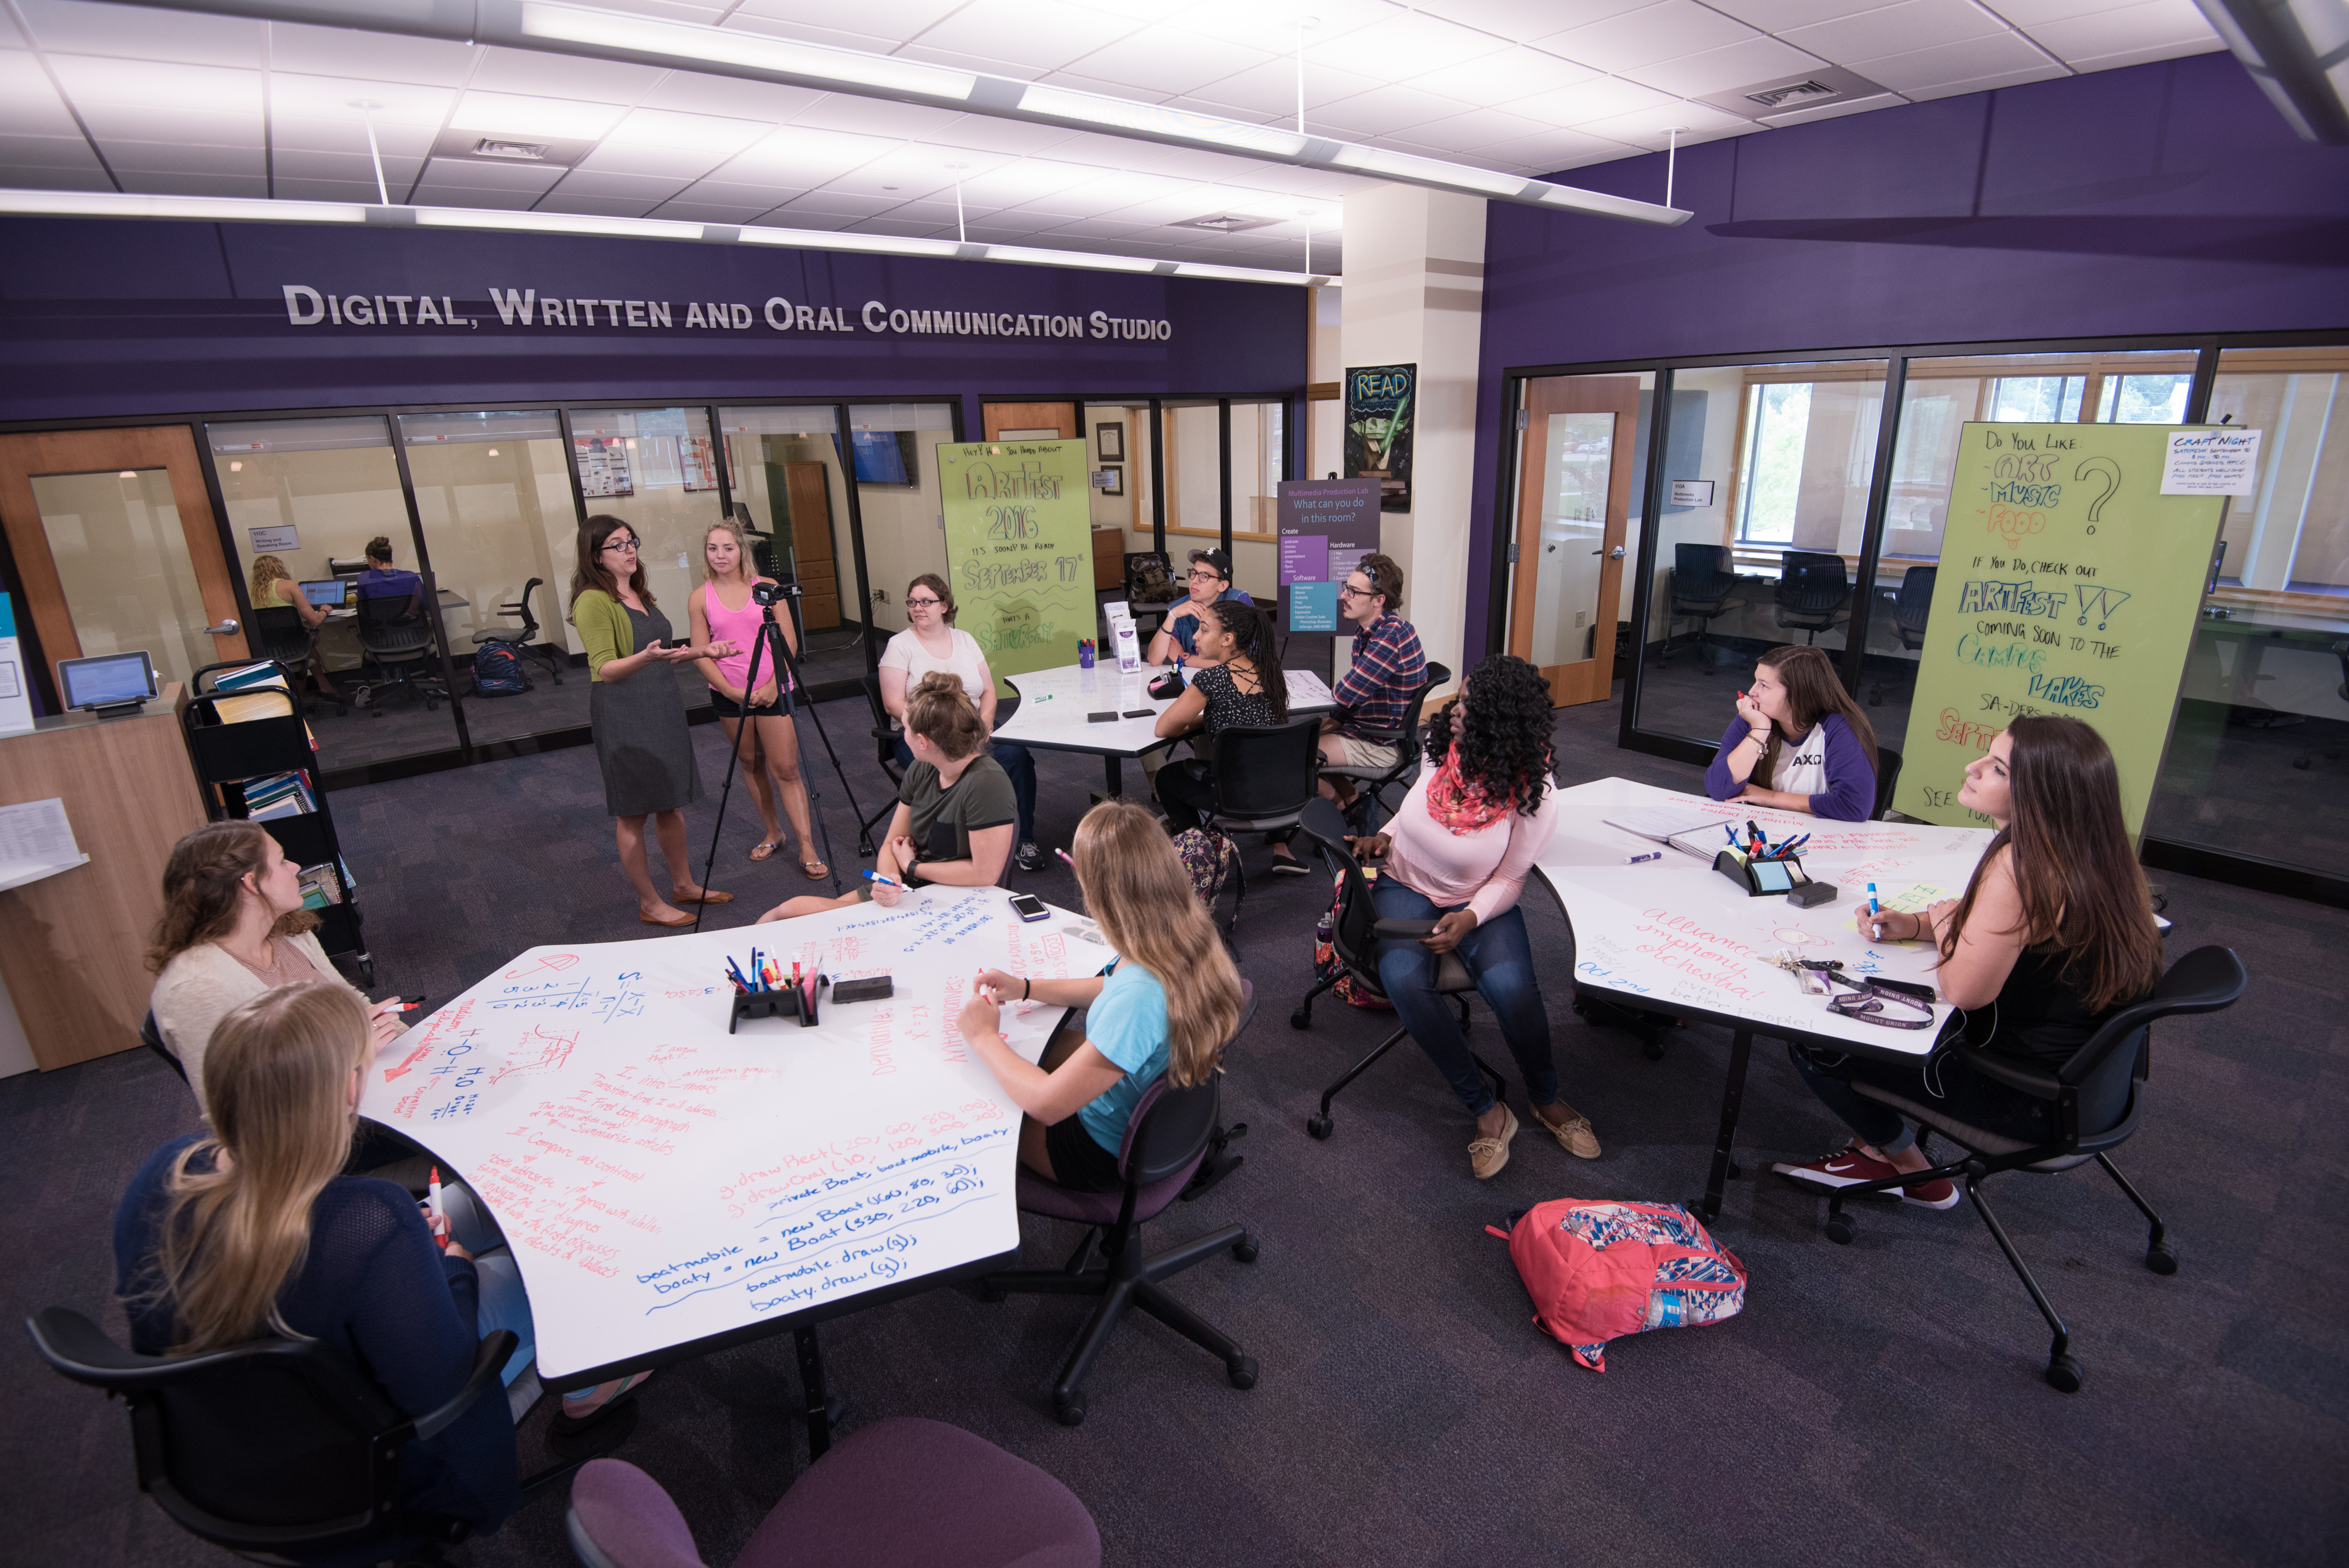 University of Mount Union students in the library's DWOC area 